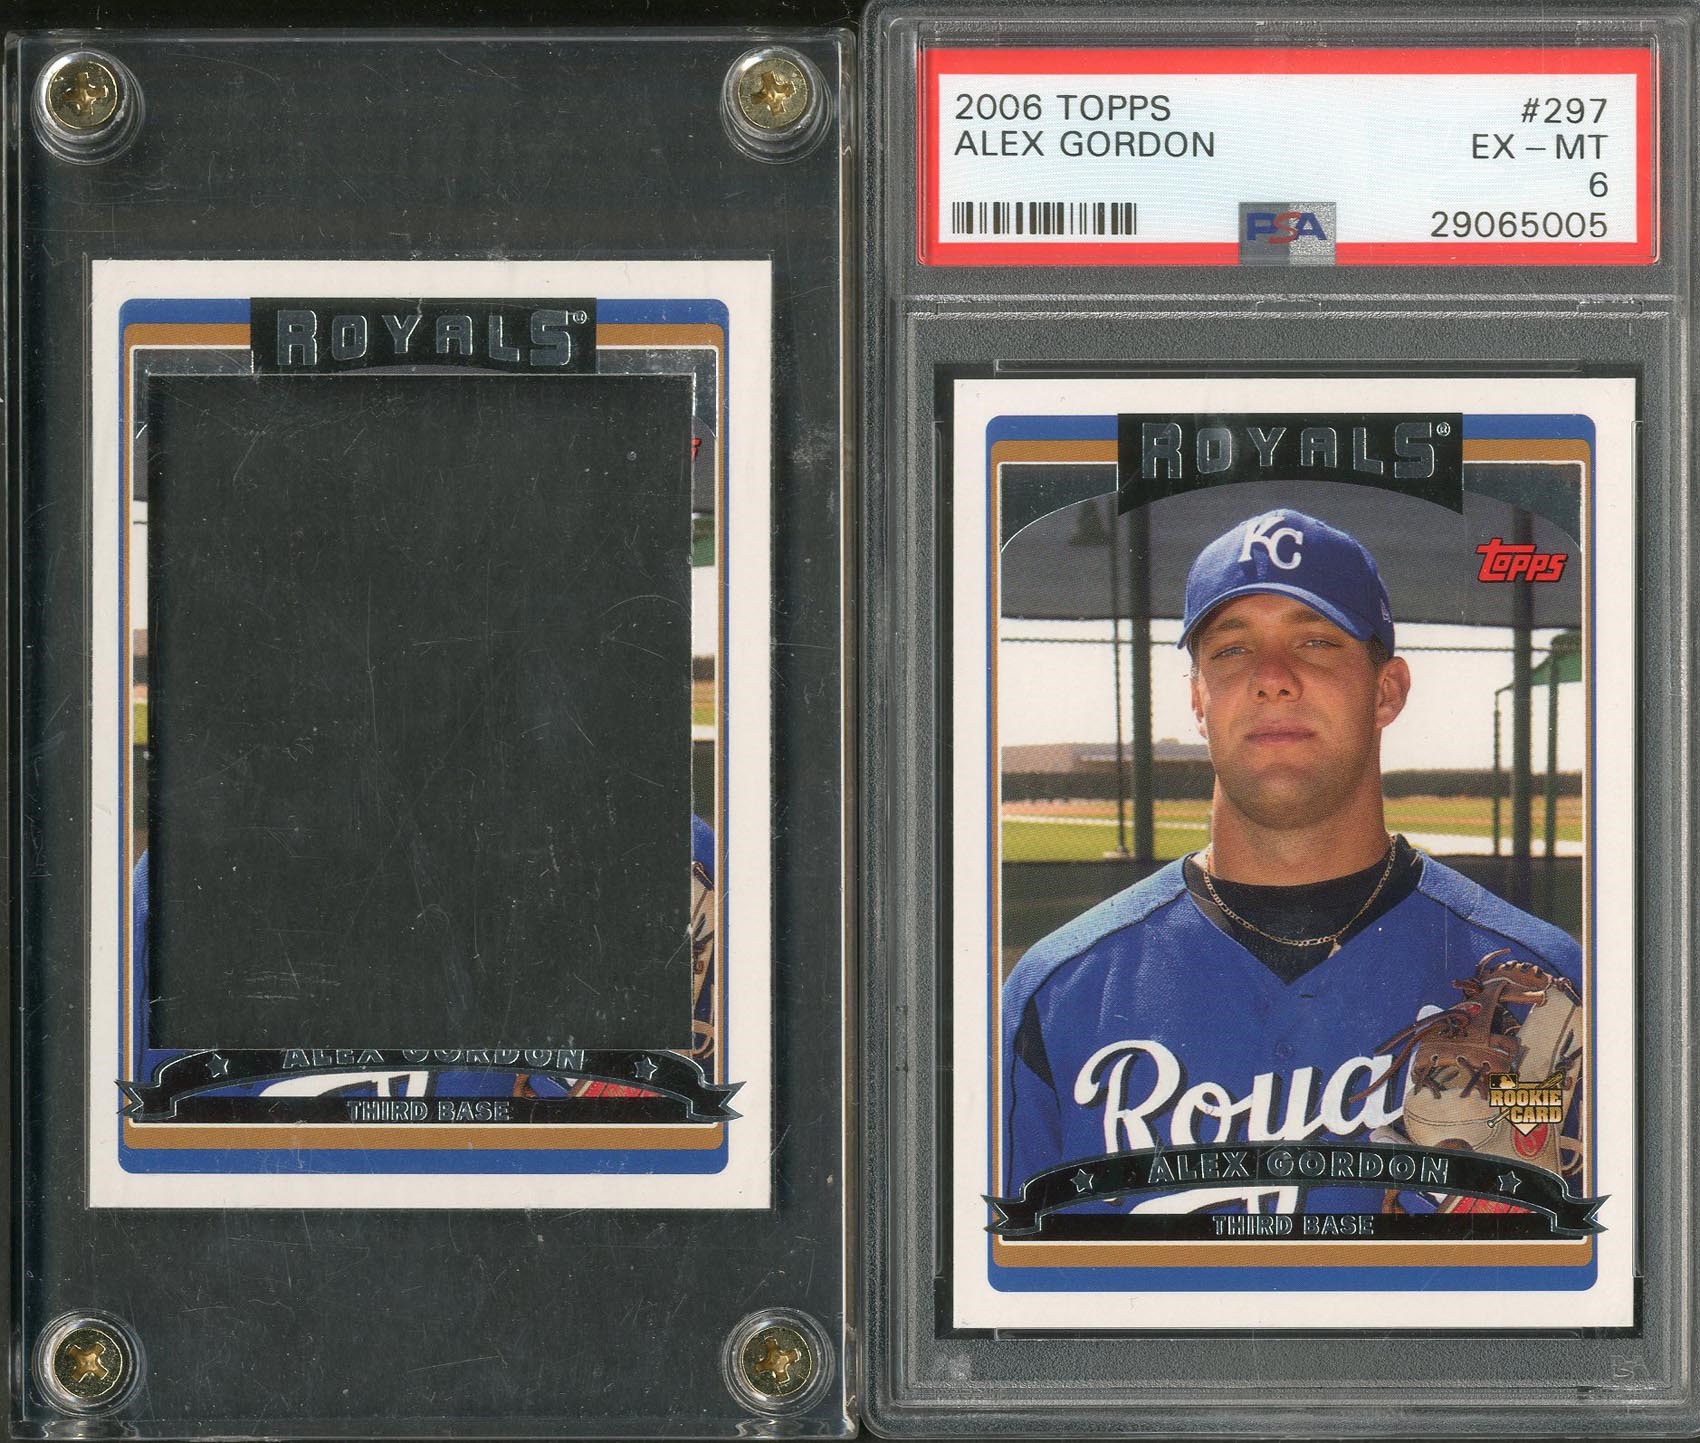 Baseball and Trading Cards - 2006 Topps #297 Alex Gordon Pair of Scarce Cards